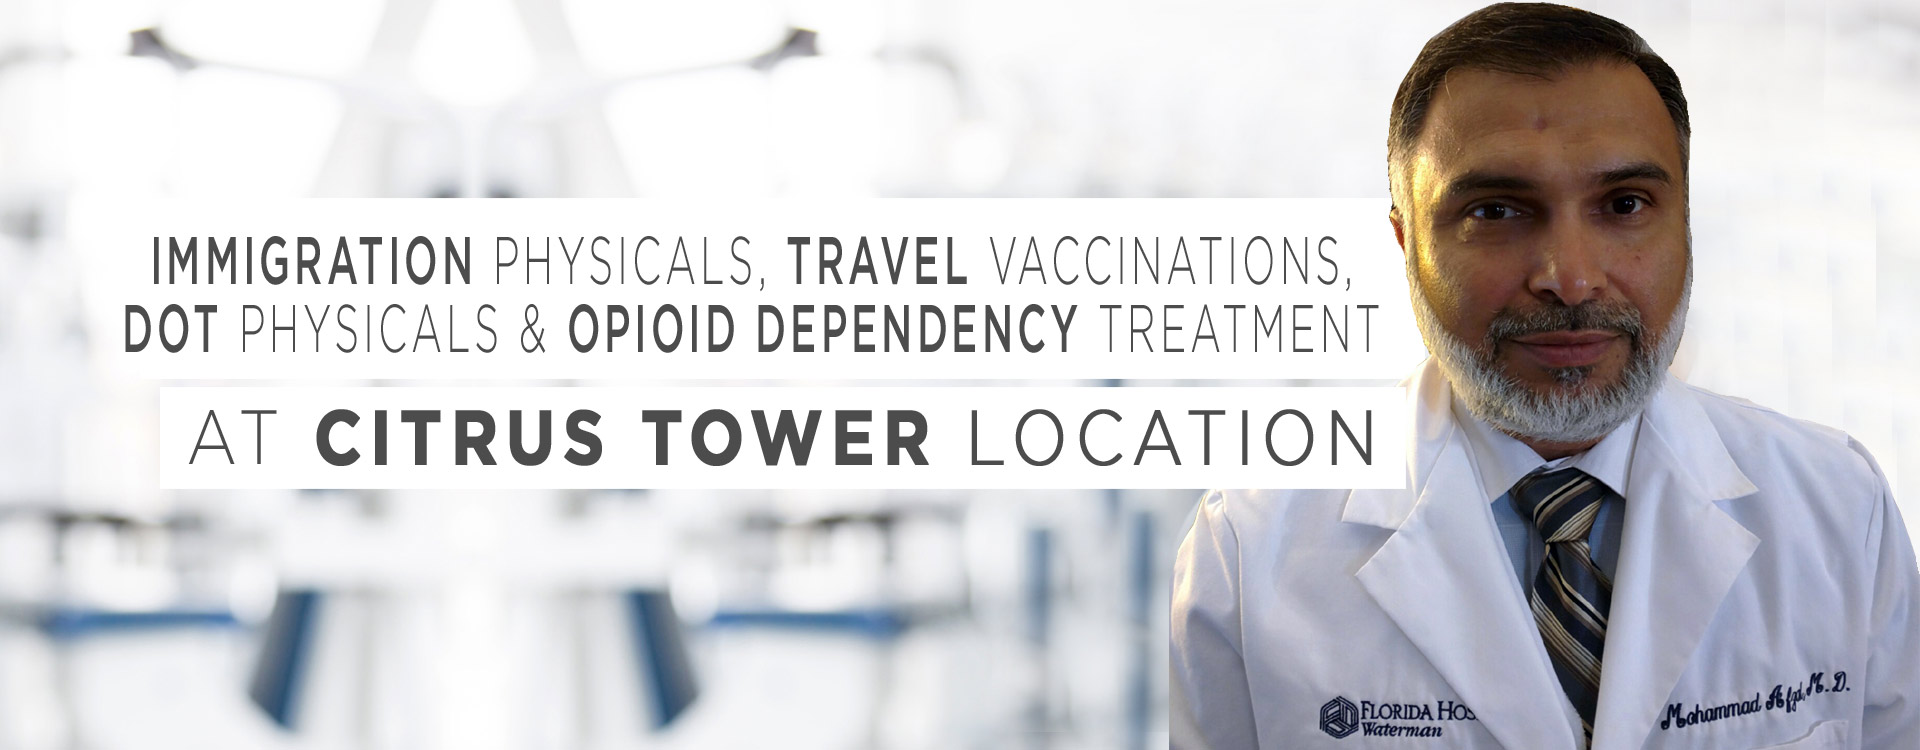 immigration physicals, travel vaccinations, DOT physicals